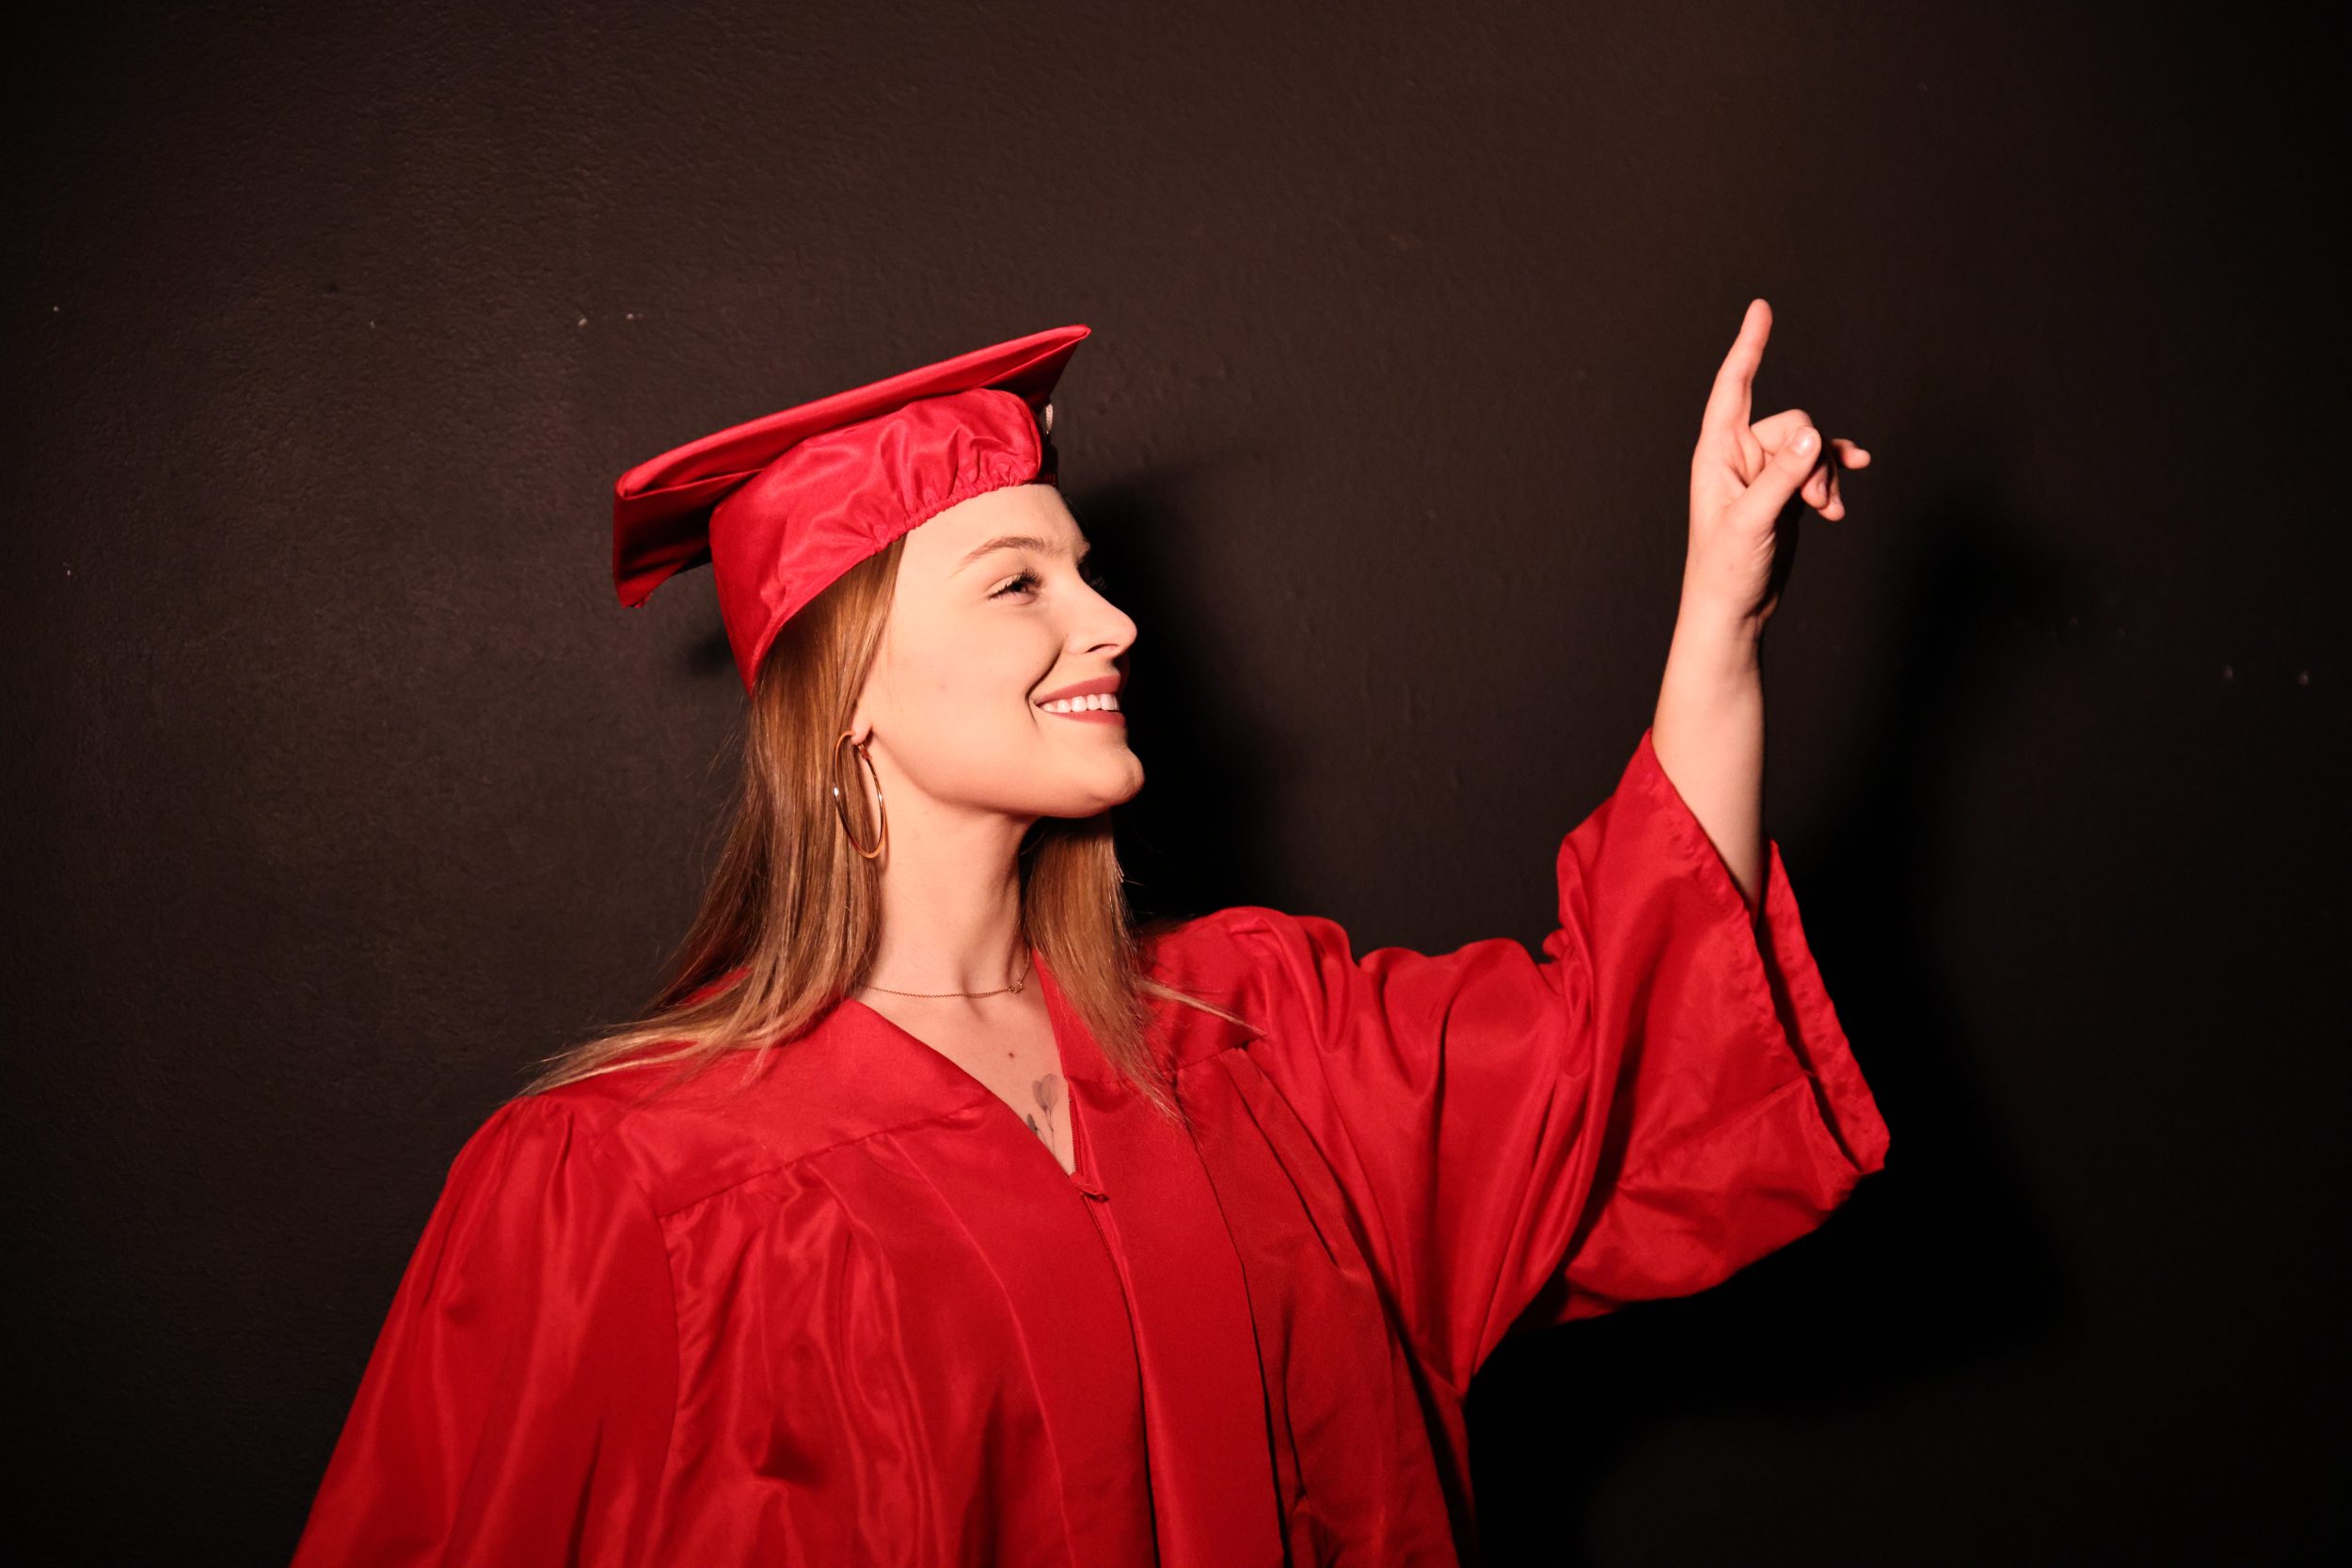 Graduation checklist: 5 steps to prepare for life after college